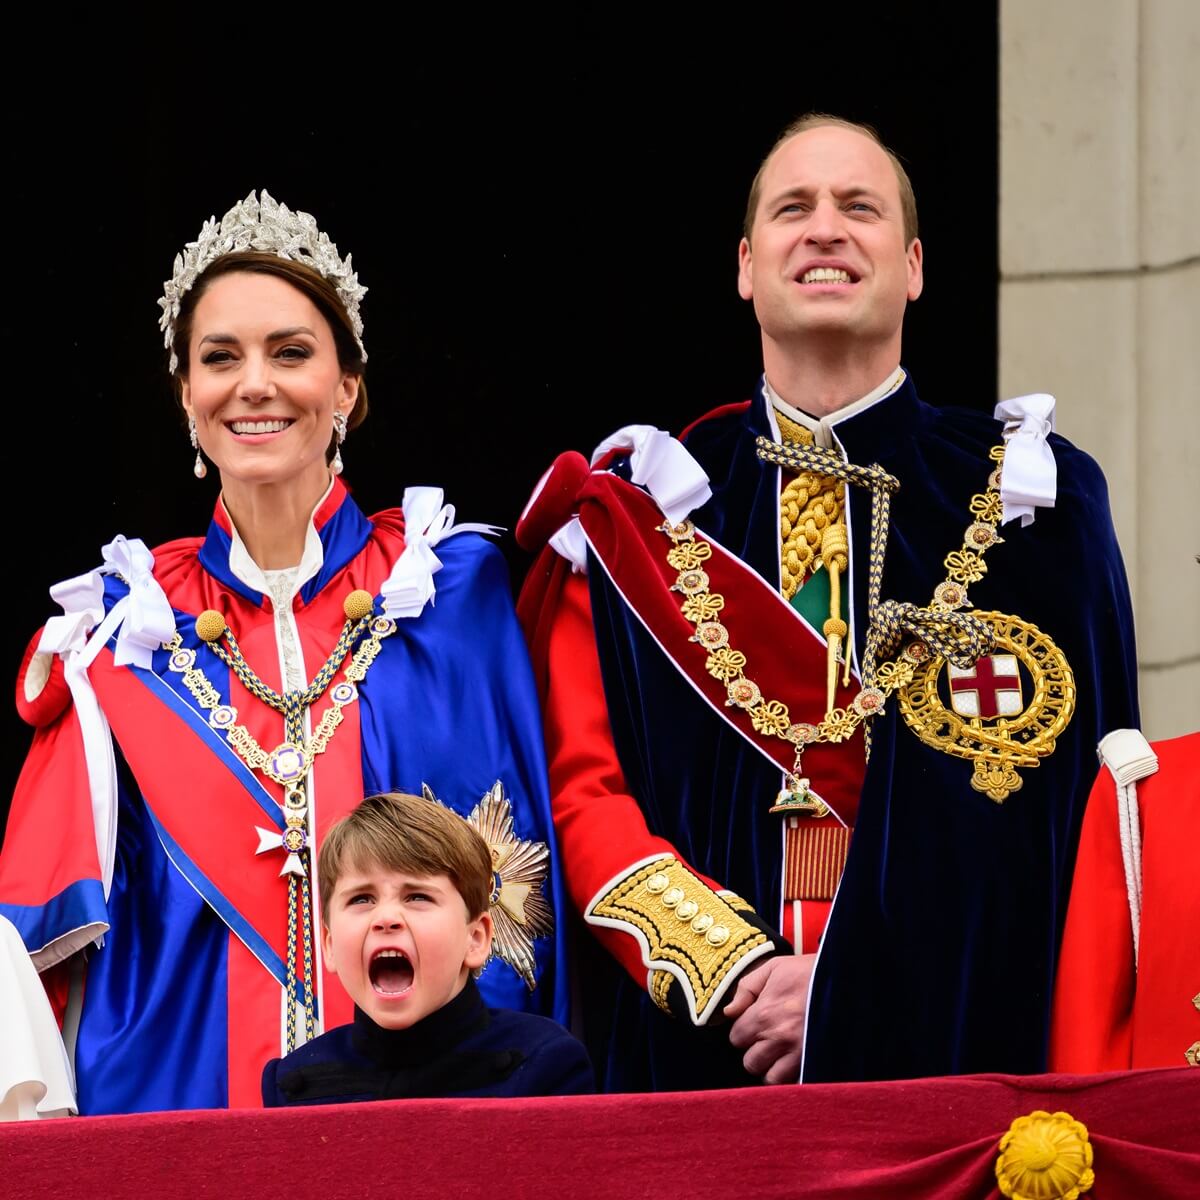 Kate Middleton, Prince Louis, and Prince William standing on the balcony of Buckingham Palace during the Coronation of King Charles III